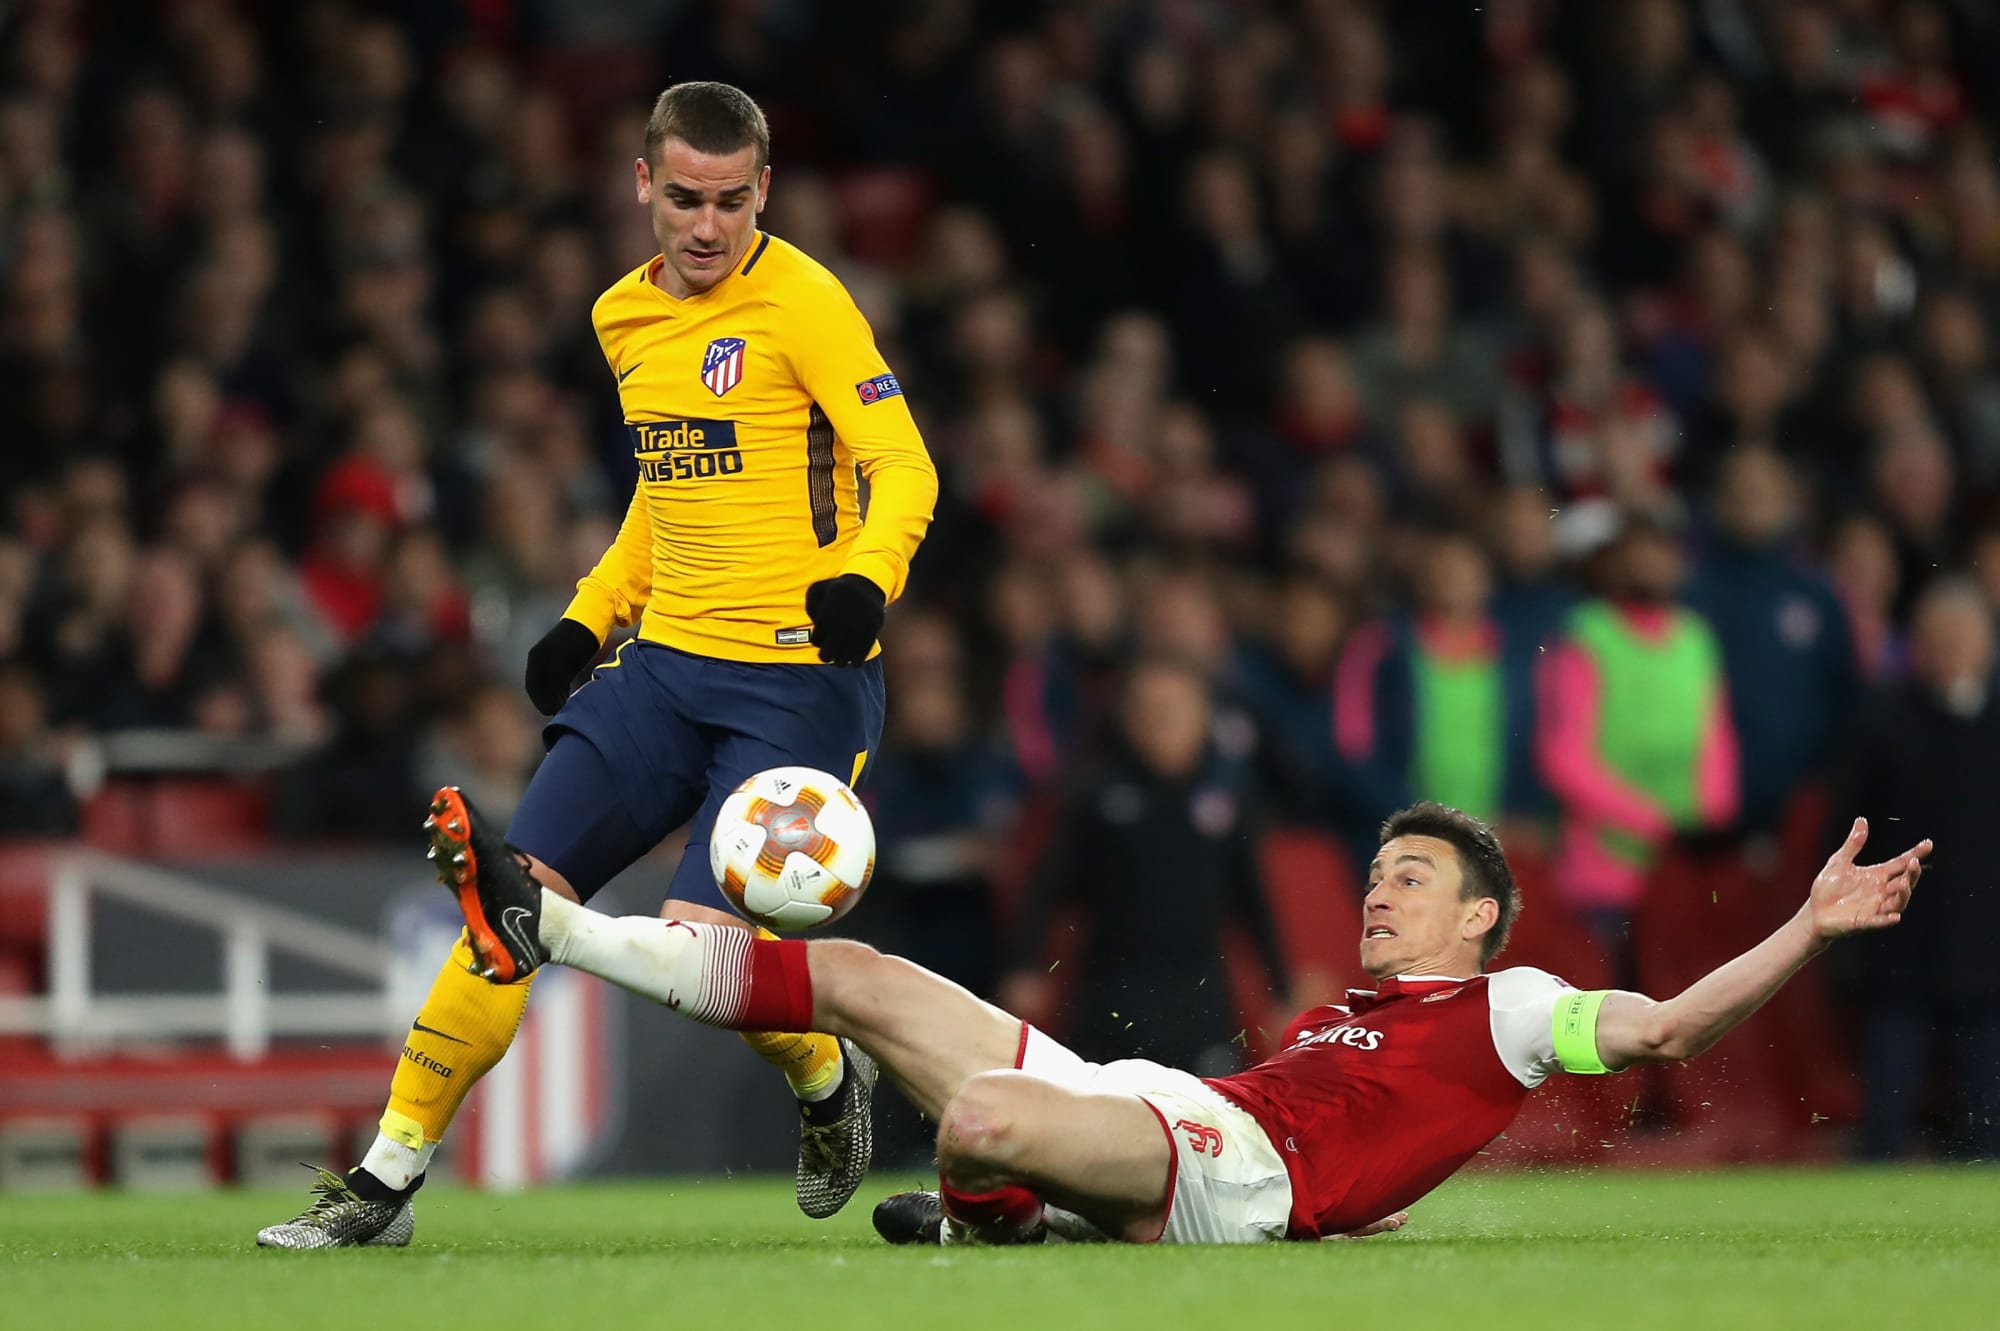 Arsenal Vs Atletico Madrid: In the end, this is why it must end